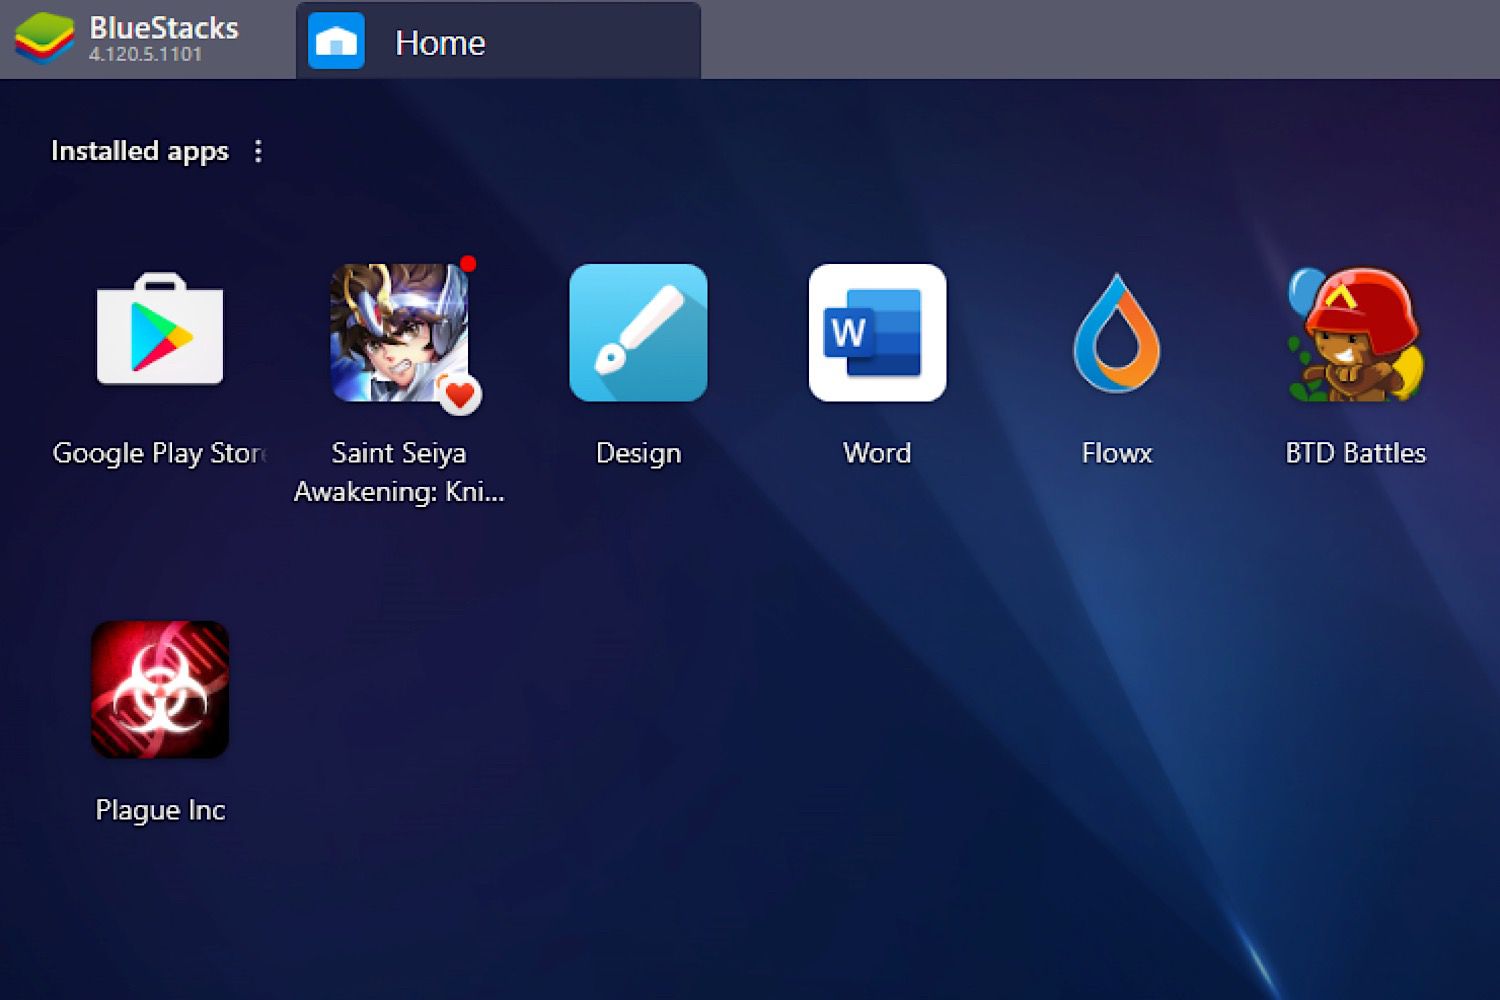 How to Use BlueStacks to Run Android Apps on Windows